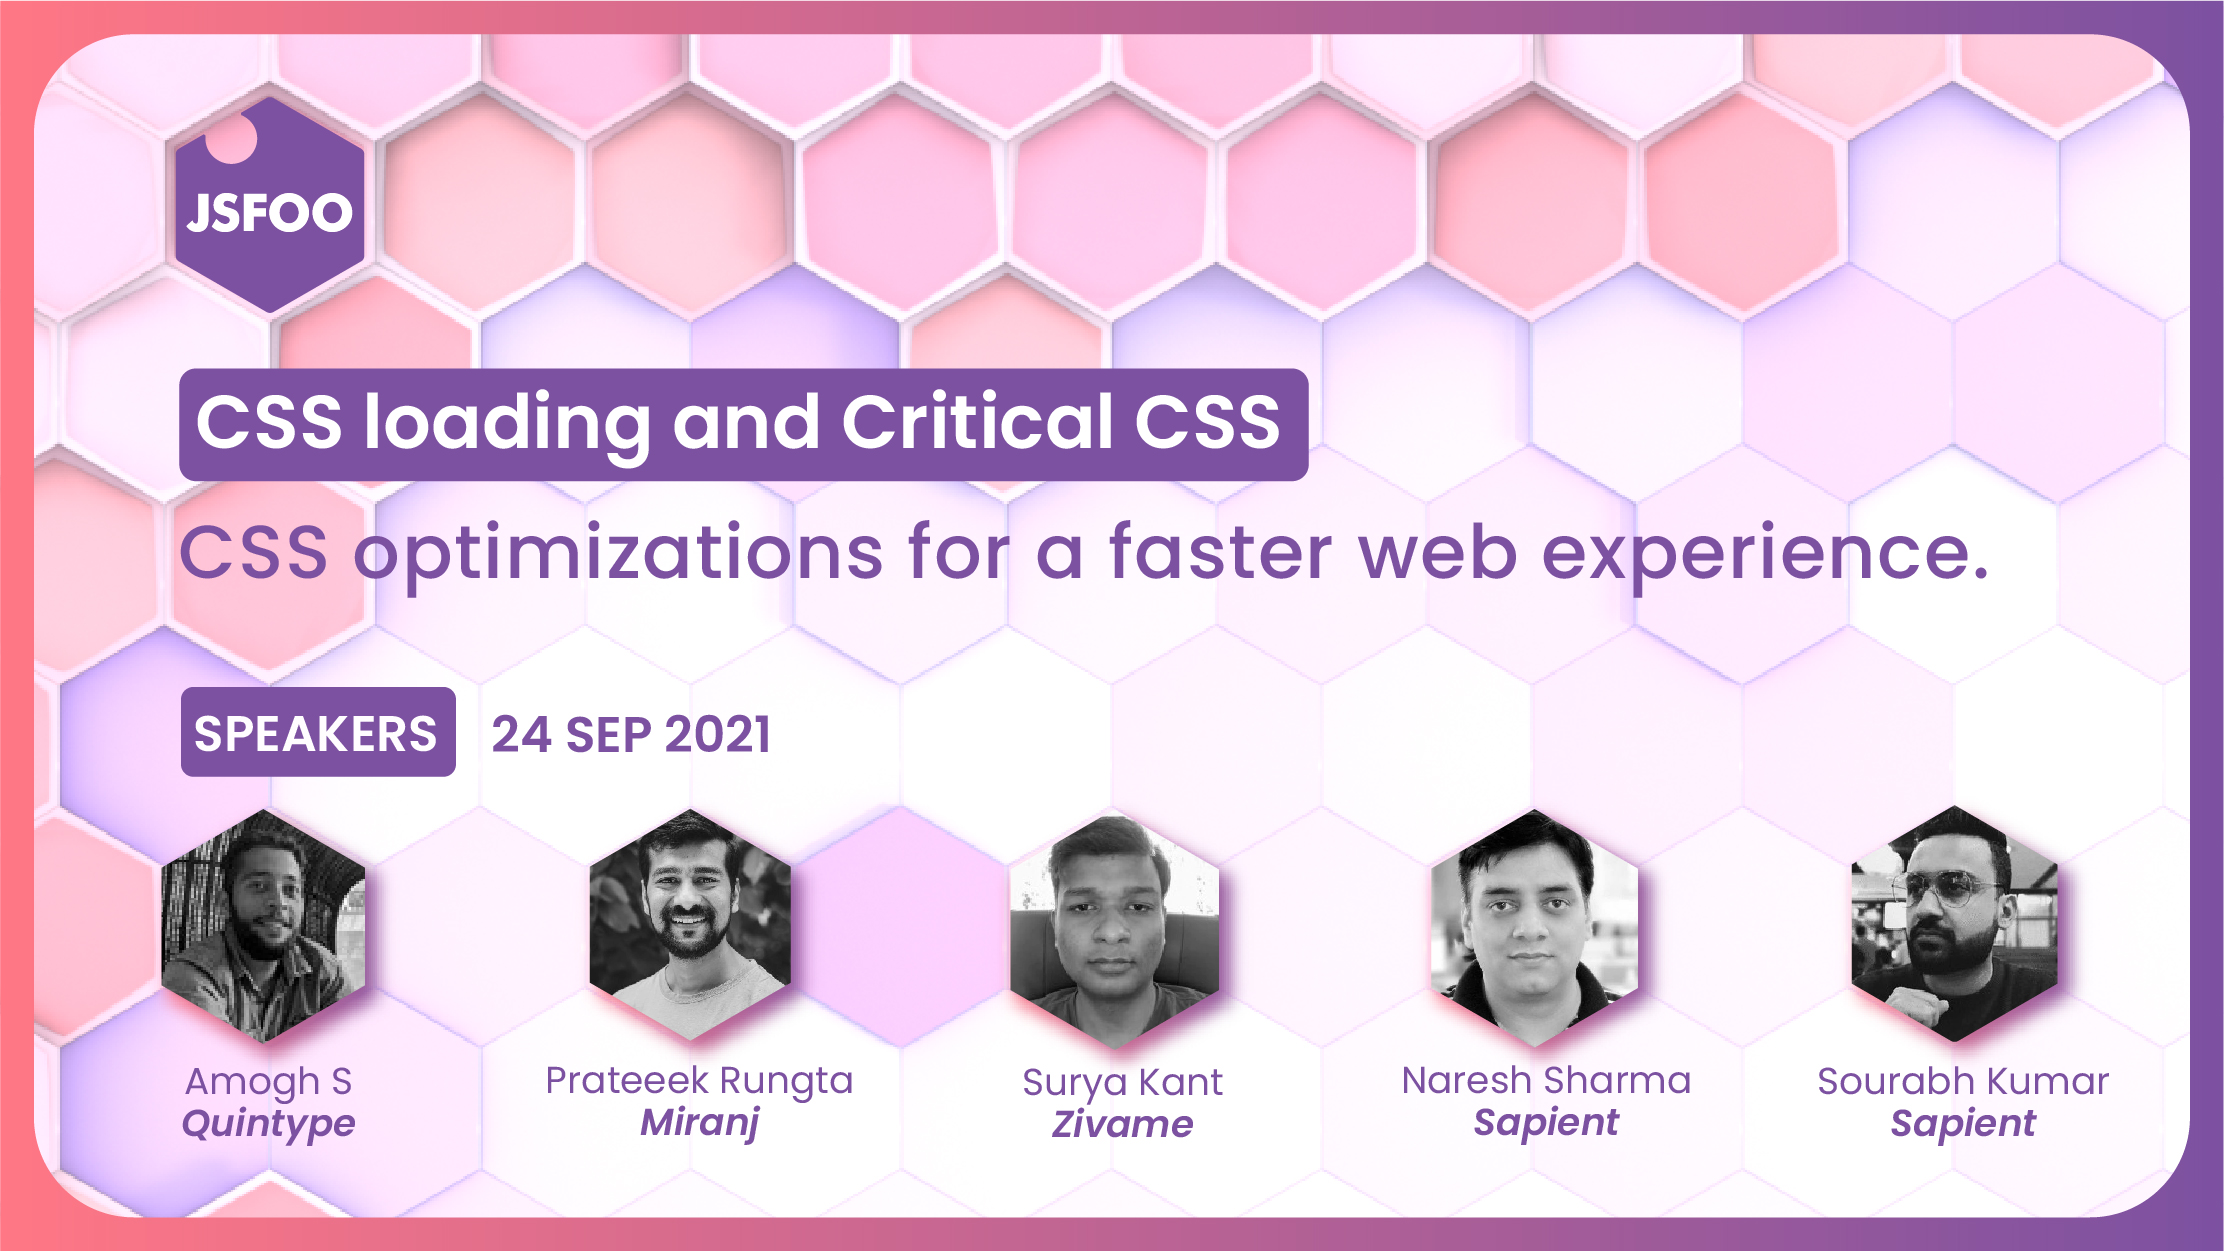 CSS_loading_and_Critical_CSS_1-05.jpg